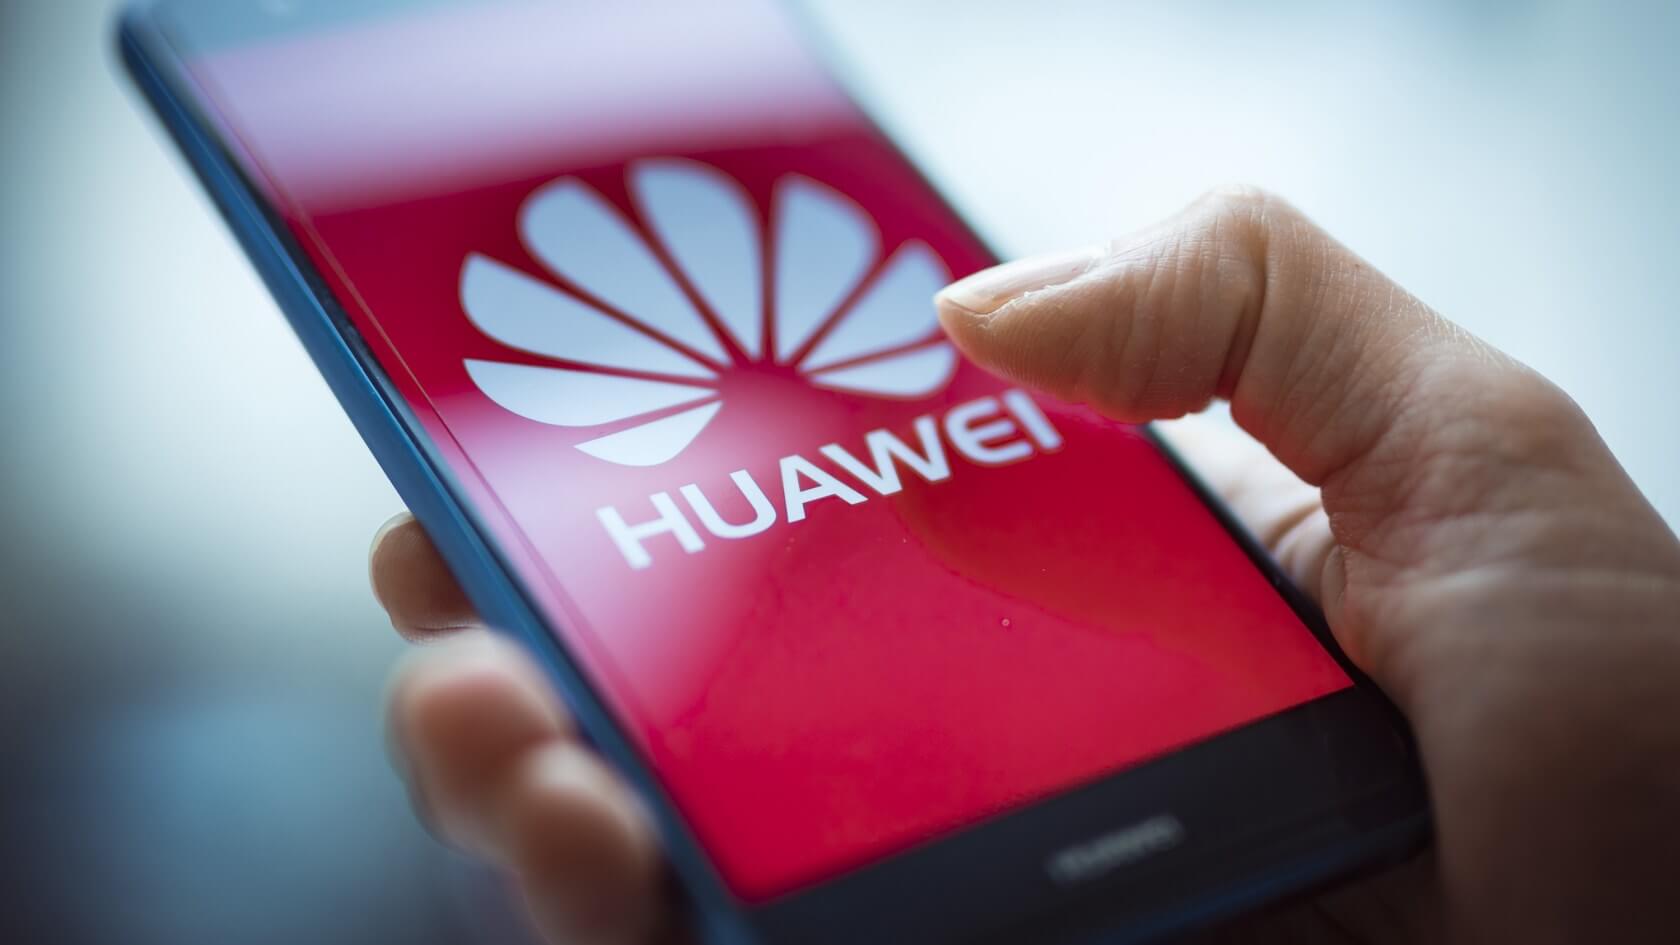 VideoLAN has reversed its Huawei ban, allowing users to download the VLC app again